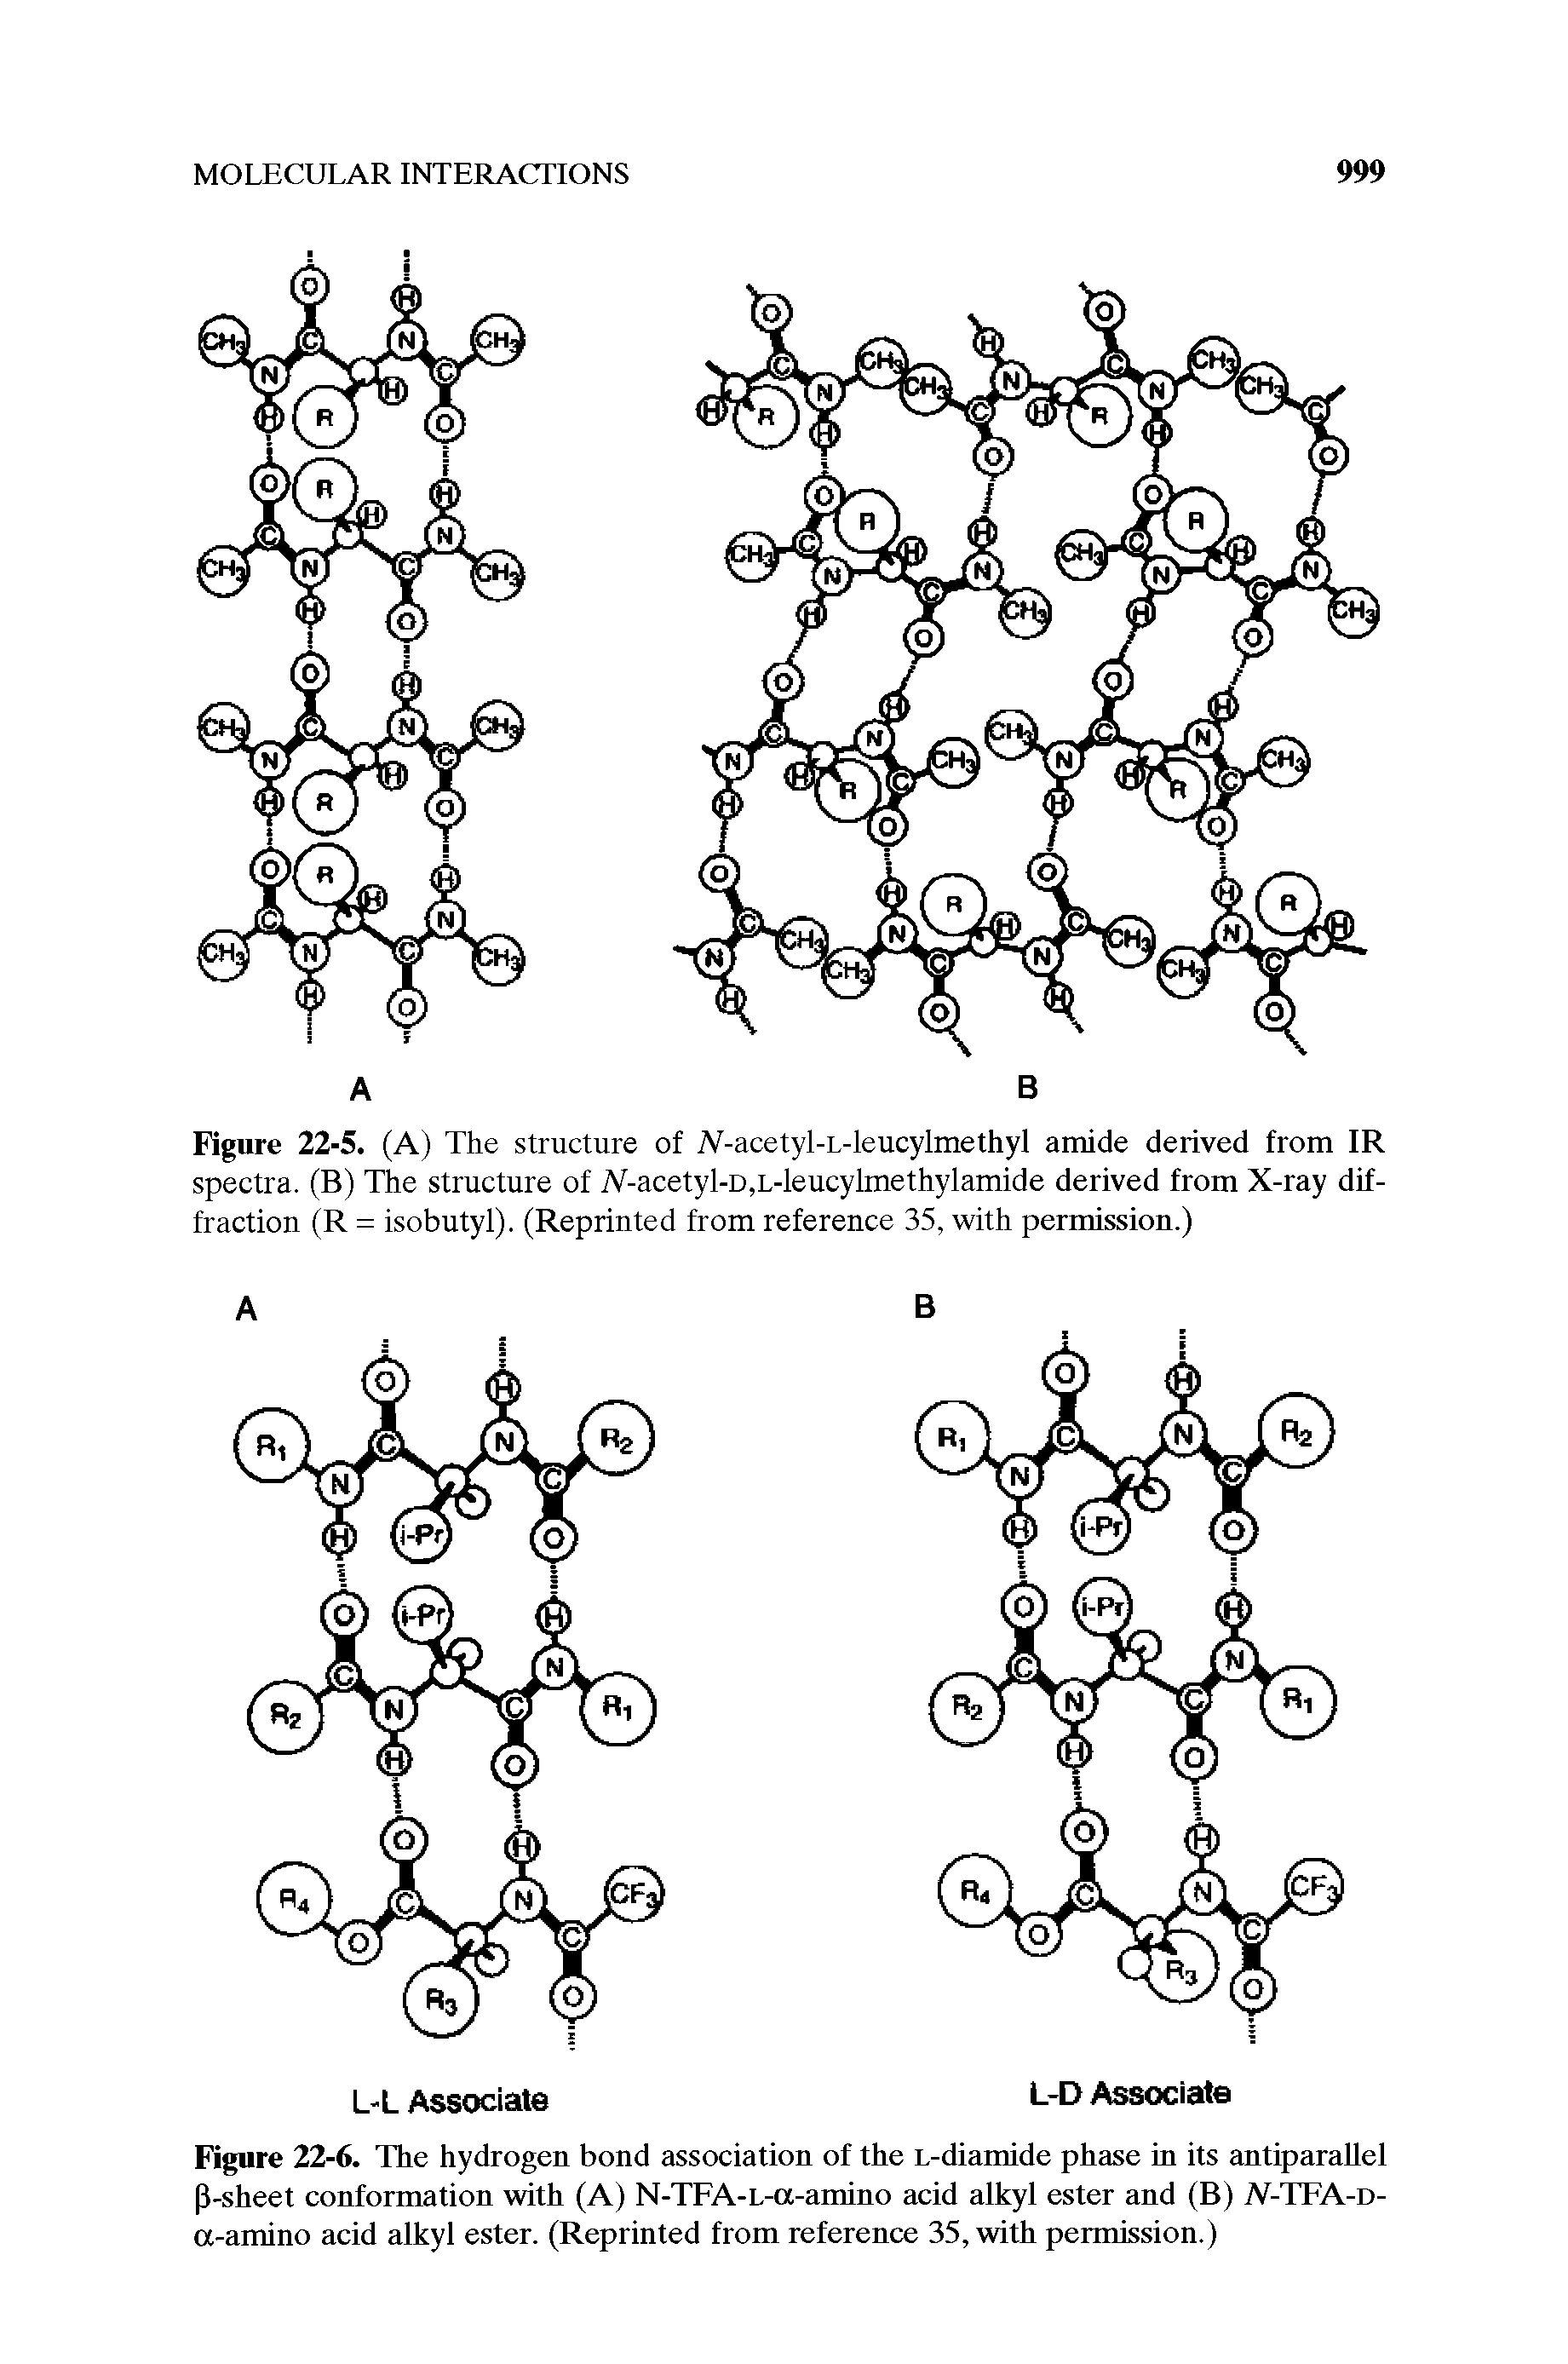 Figure 22-6. The hydrogen bond association of the L-diamide phase in its antiparaUel P-sheet conformation with (A) N-TFA-L-a-amino acid alkyl ester and (B) A-TFA-d-a-amino acid alkyl ester. (Reprinted from reference 35, with permission.)...